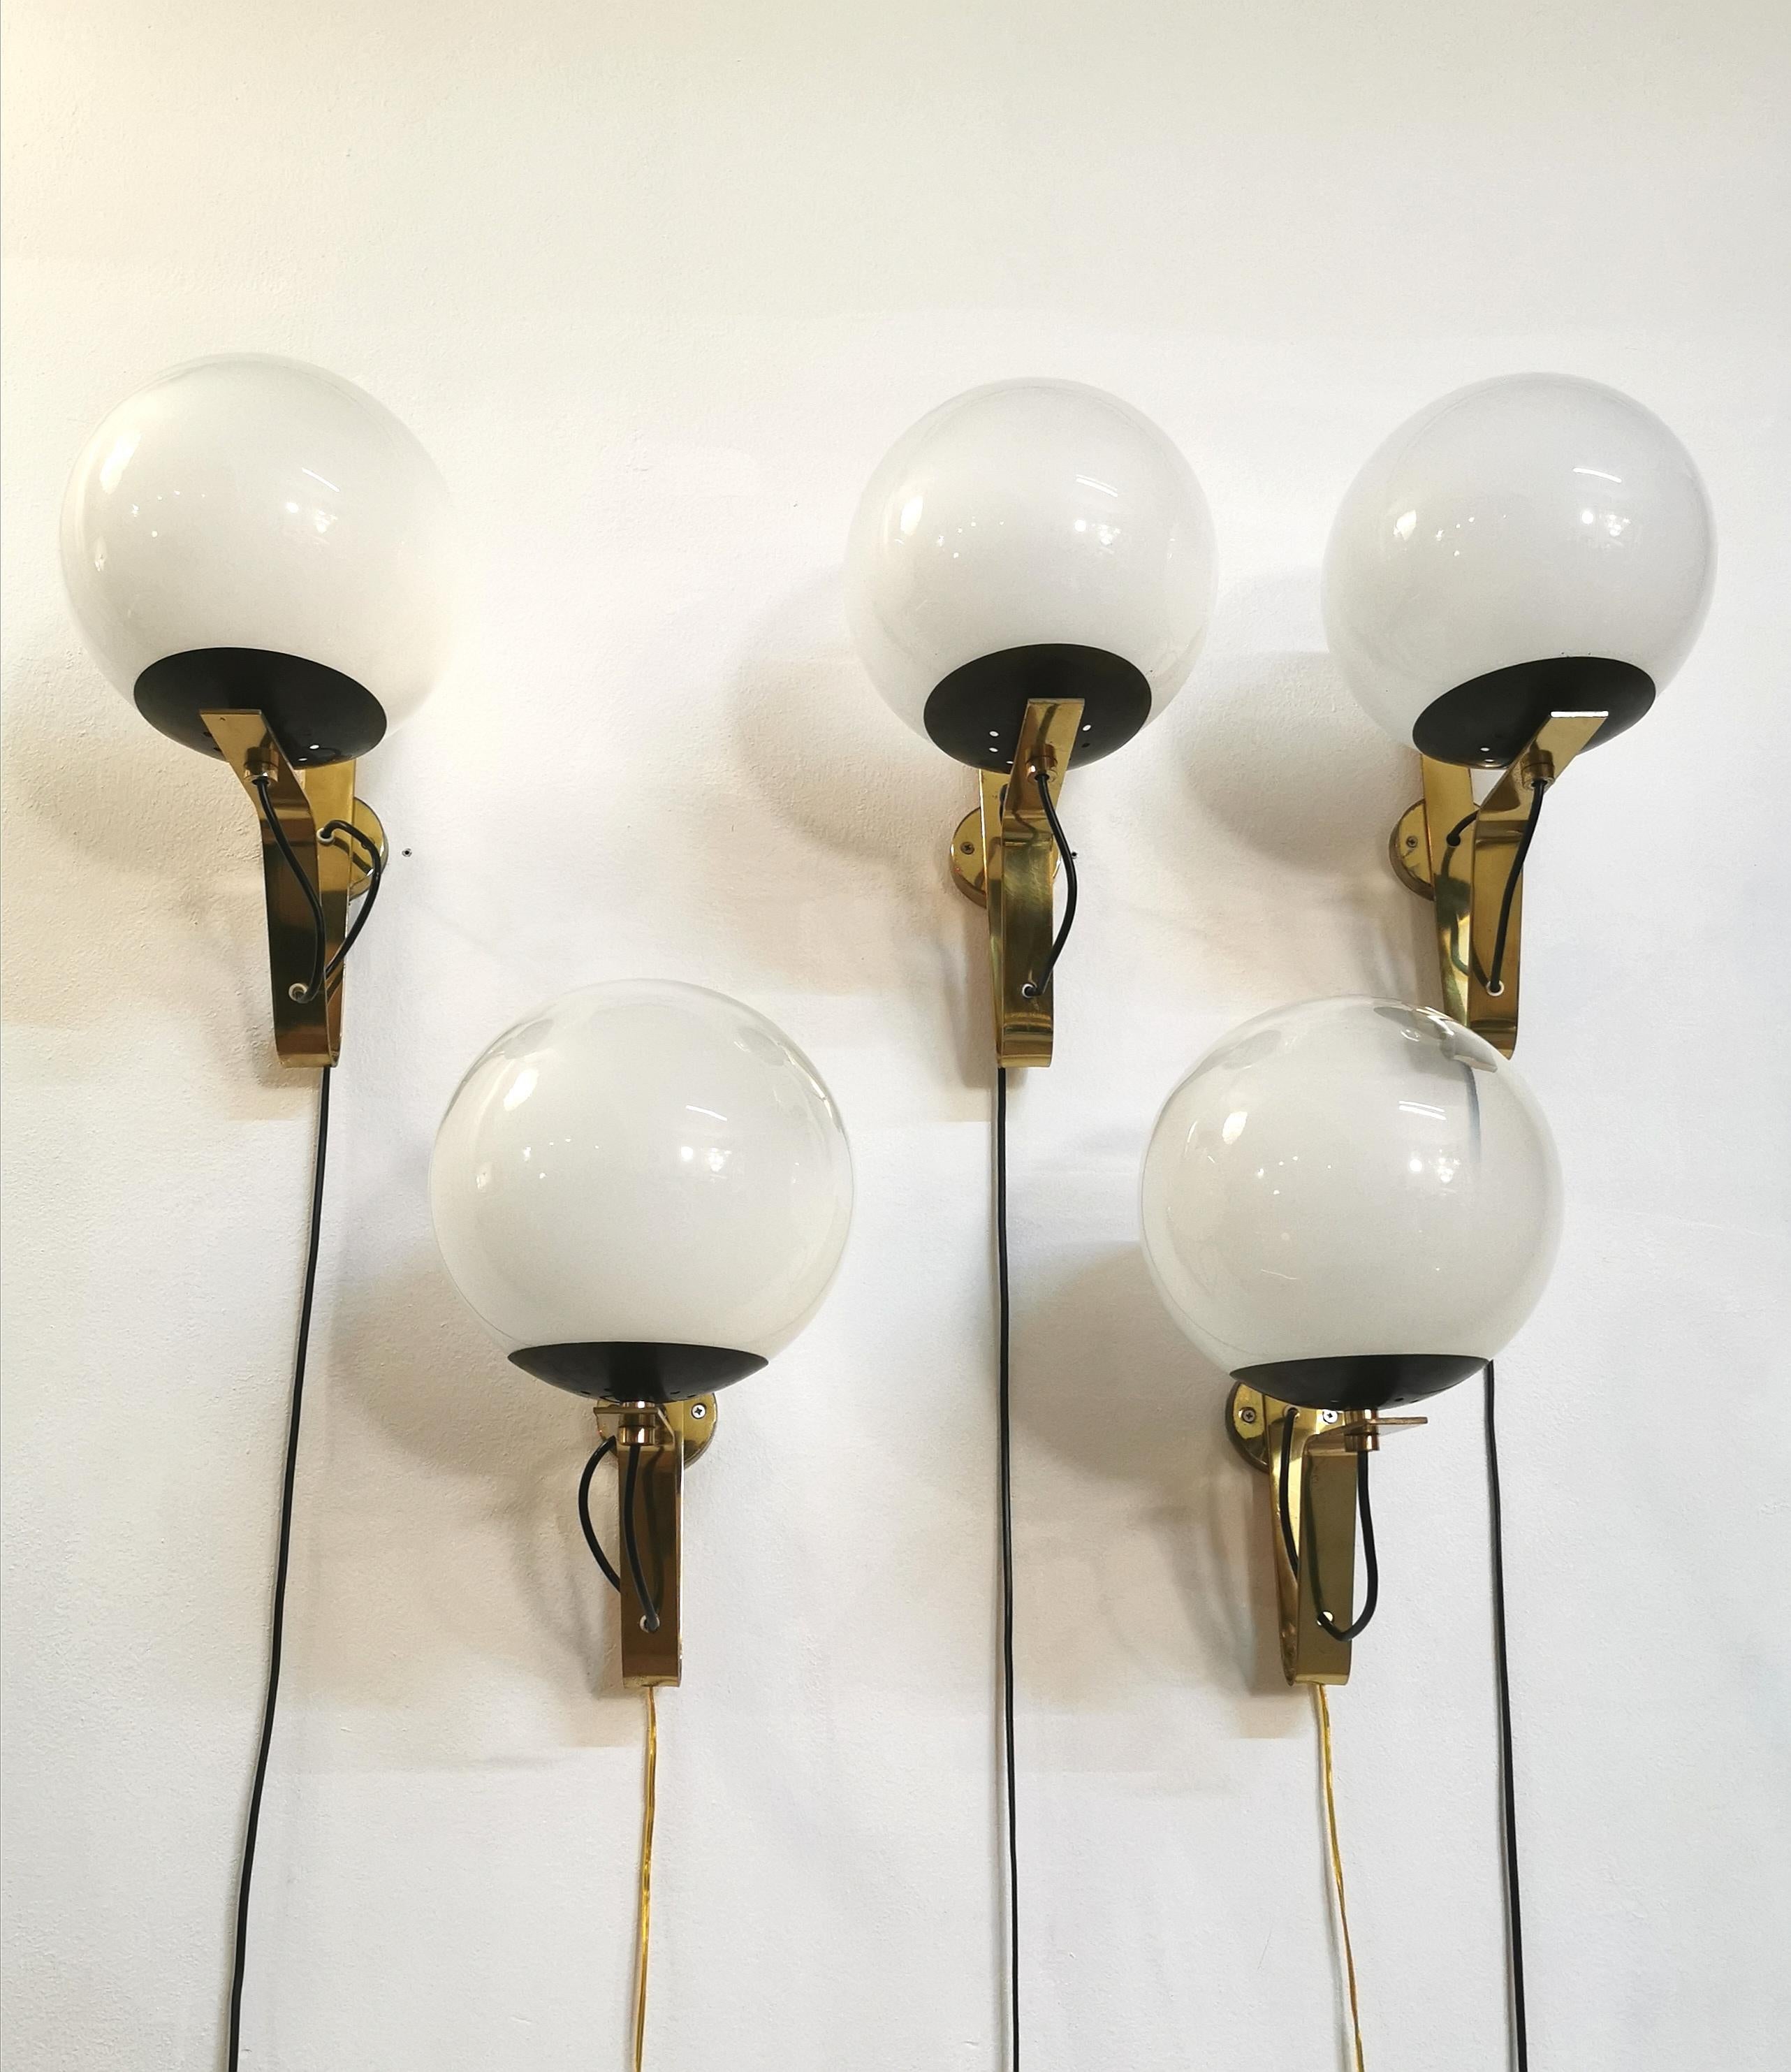 Set of 5 wall lamps designed in the style of the renowned designer Gino Sarfatti between the 60s and 70s. Each single wall lamp has a structure with curved bands in brass with 1 E27 light that supports a particular white glass with a round shape